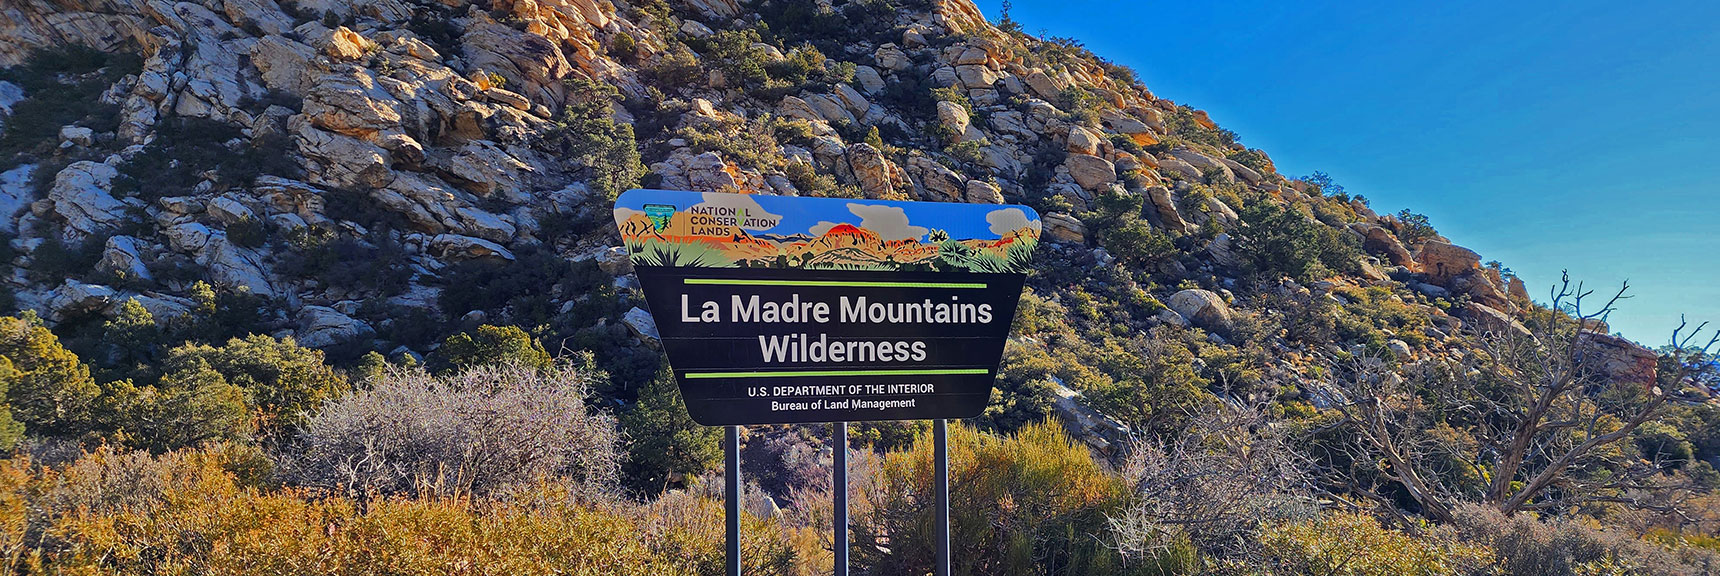 La Madre Mountain Wilderness Entrance Sign on NW Side of White Rock Mountain | White Rock Mountain Loop Trail | Red Rock Canyon, Nevada